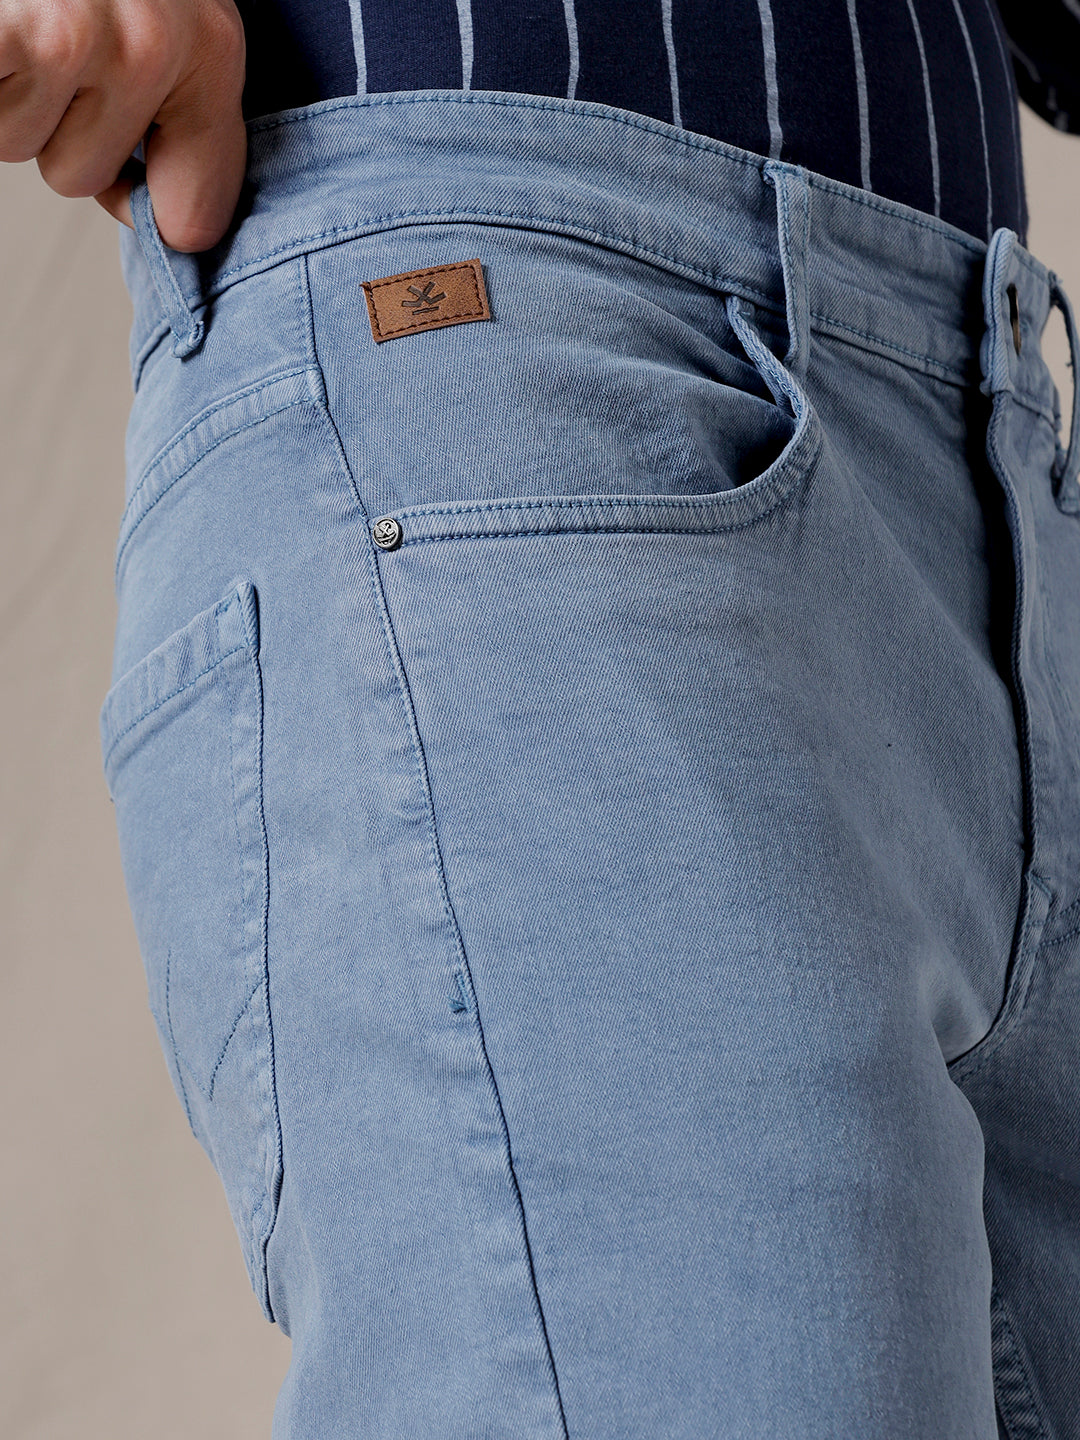 Solid Sleek Mid Rise Blue Jeans